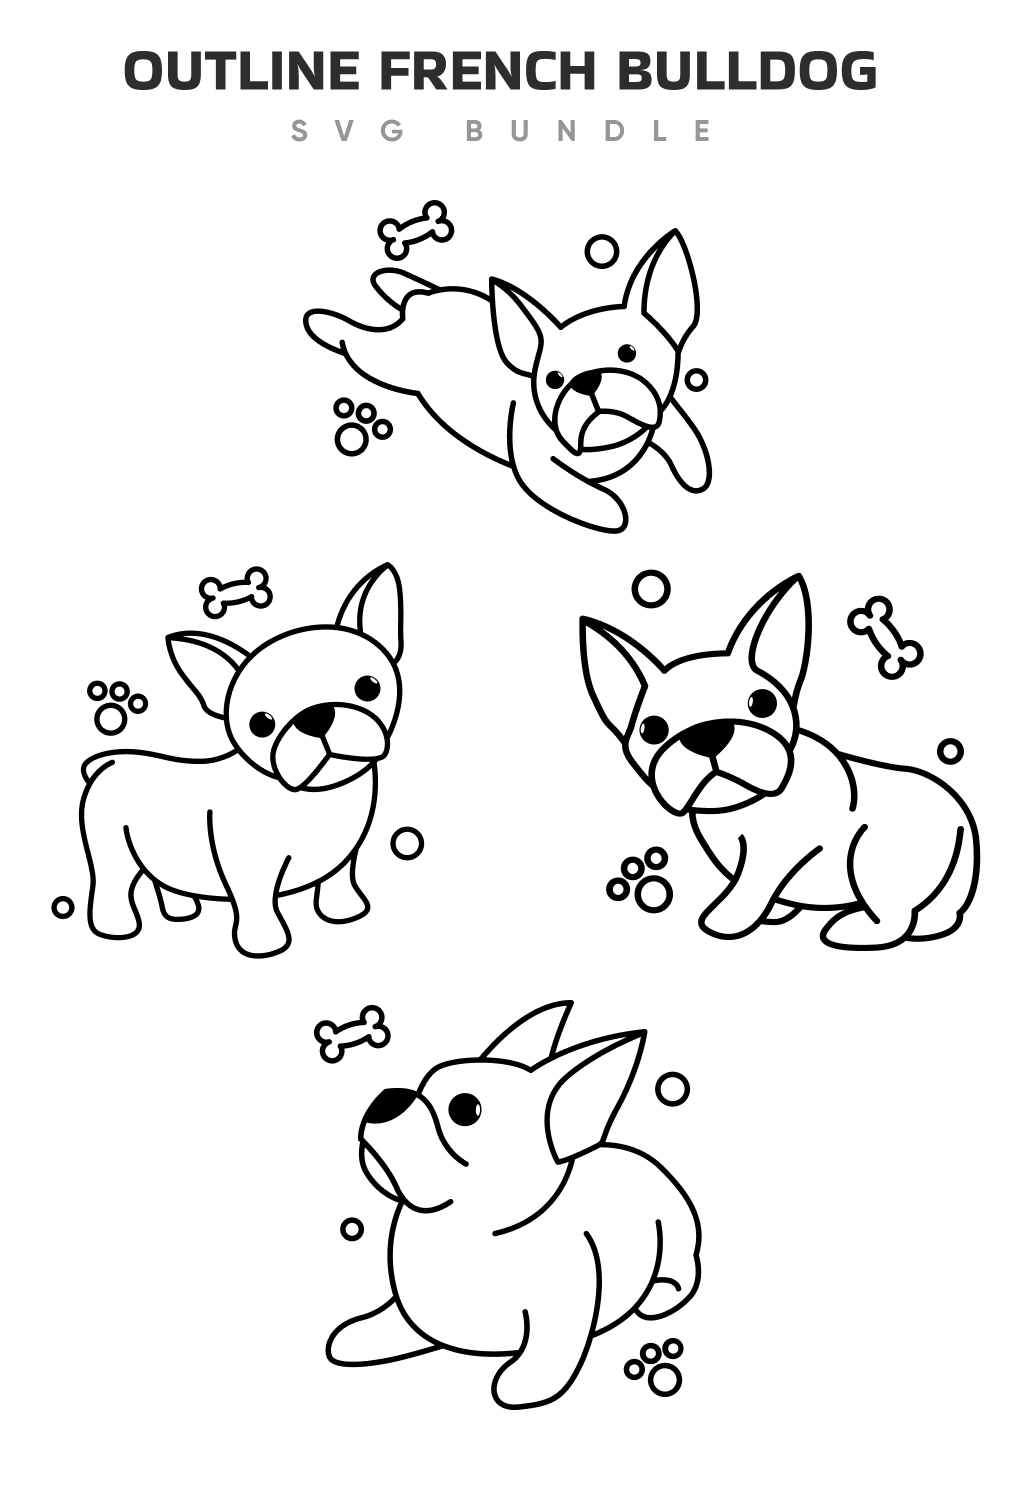 So nice outline french bulldogs.